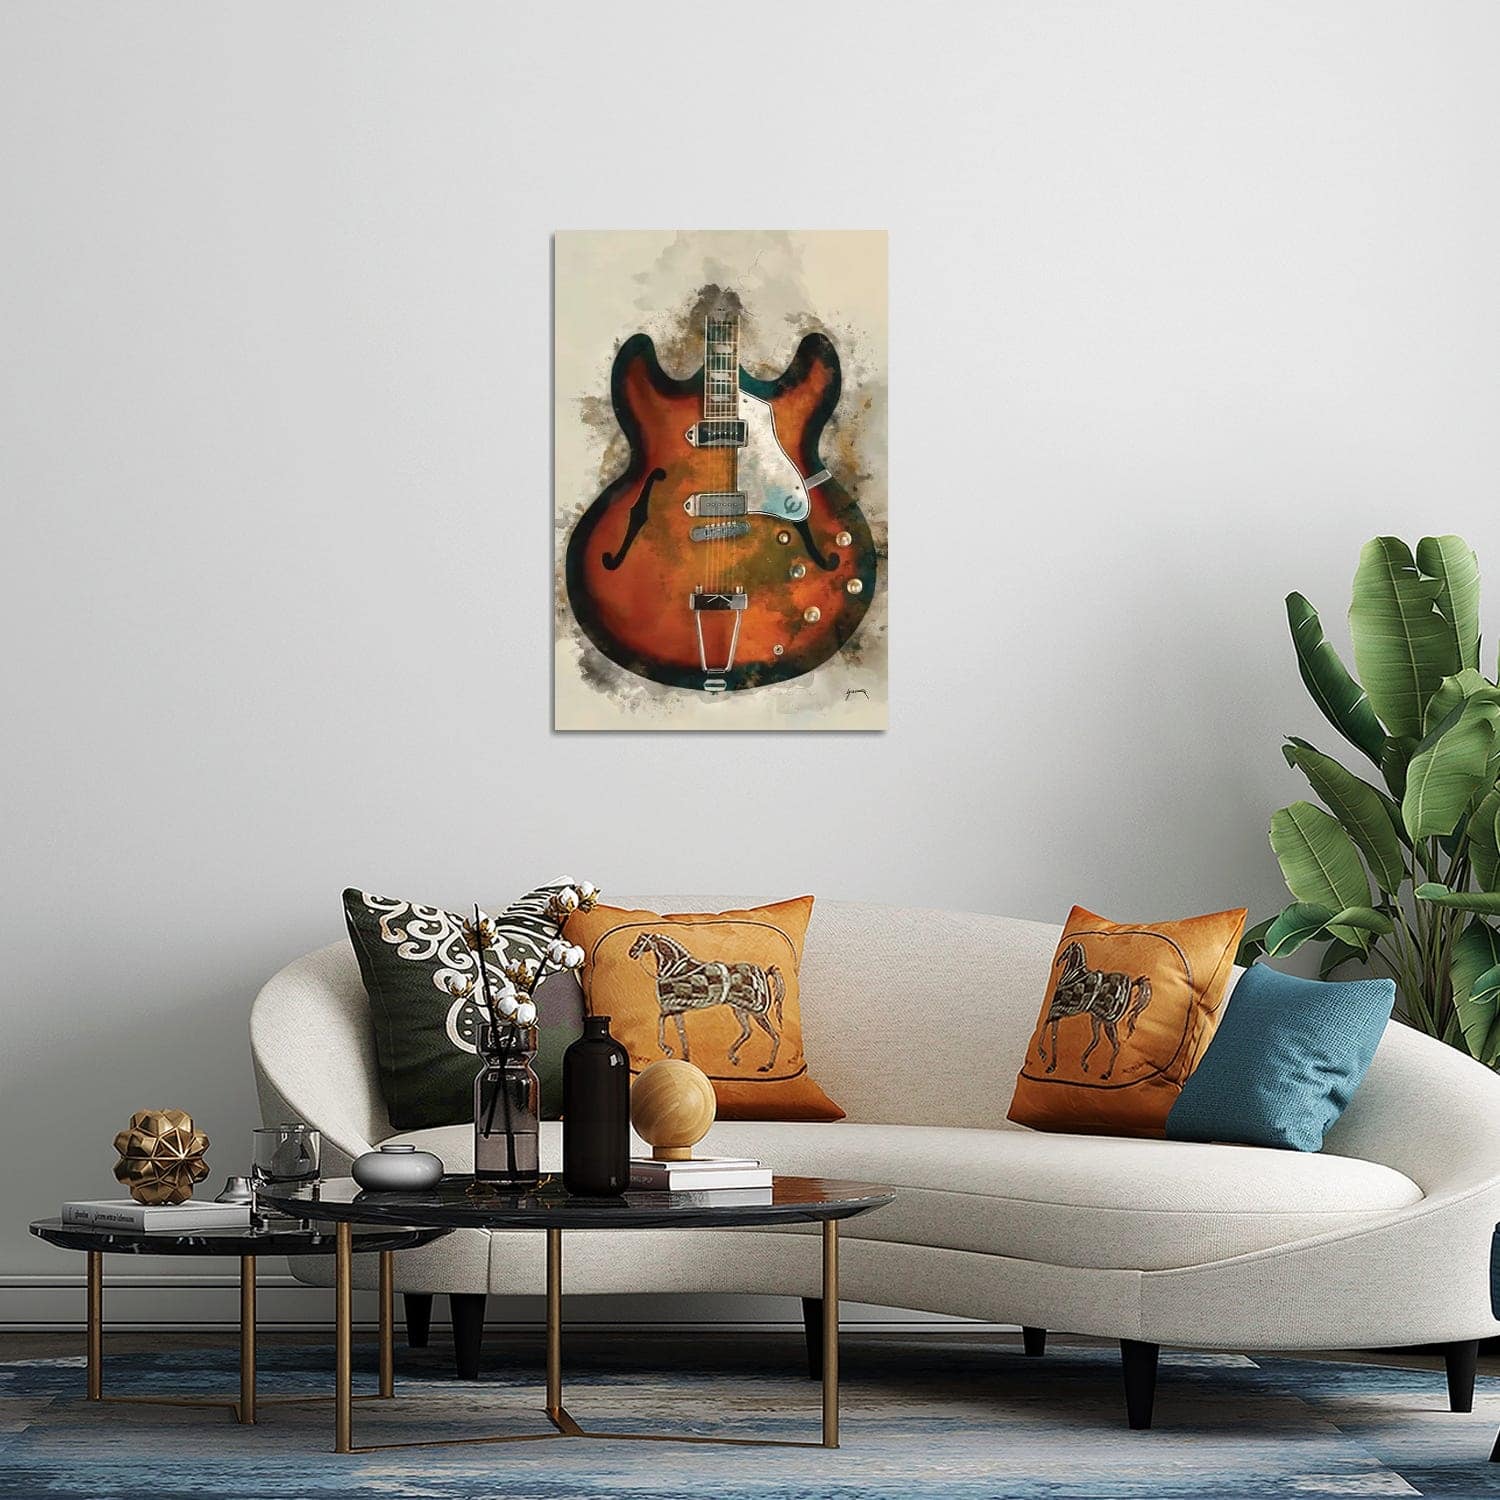 John Lennon's Guitar Print On Acrylic Glass by Pop Cult Posters - Bed ...